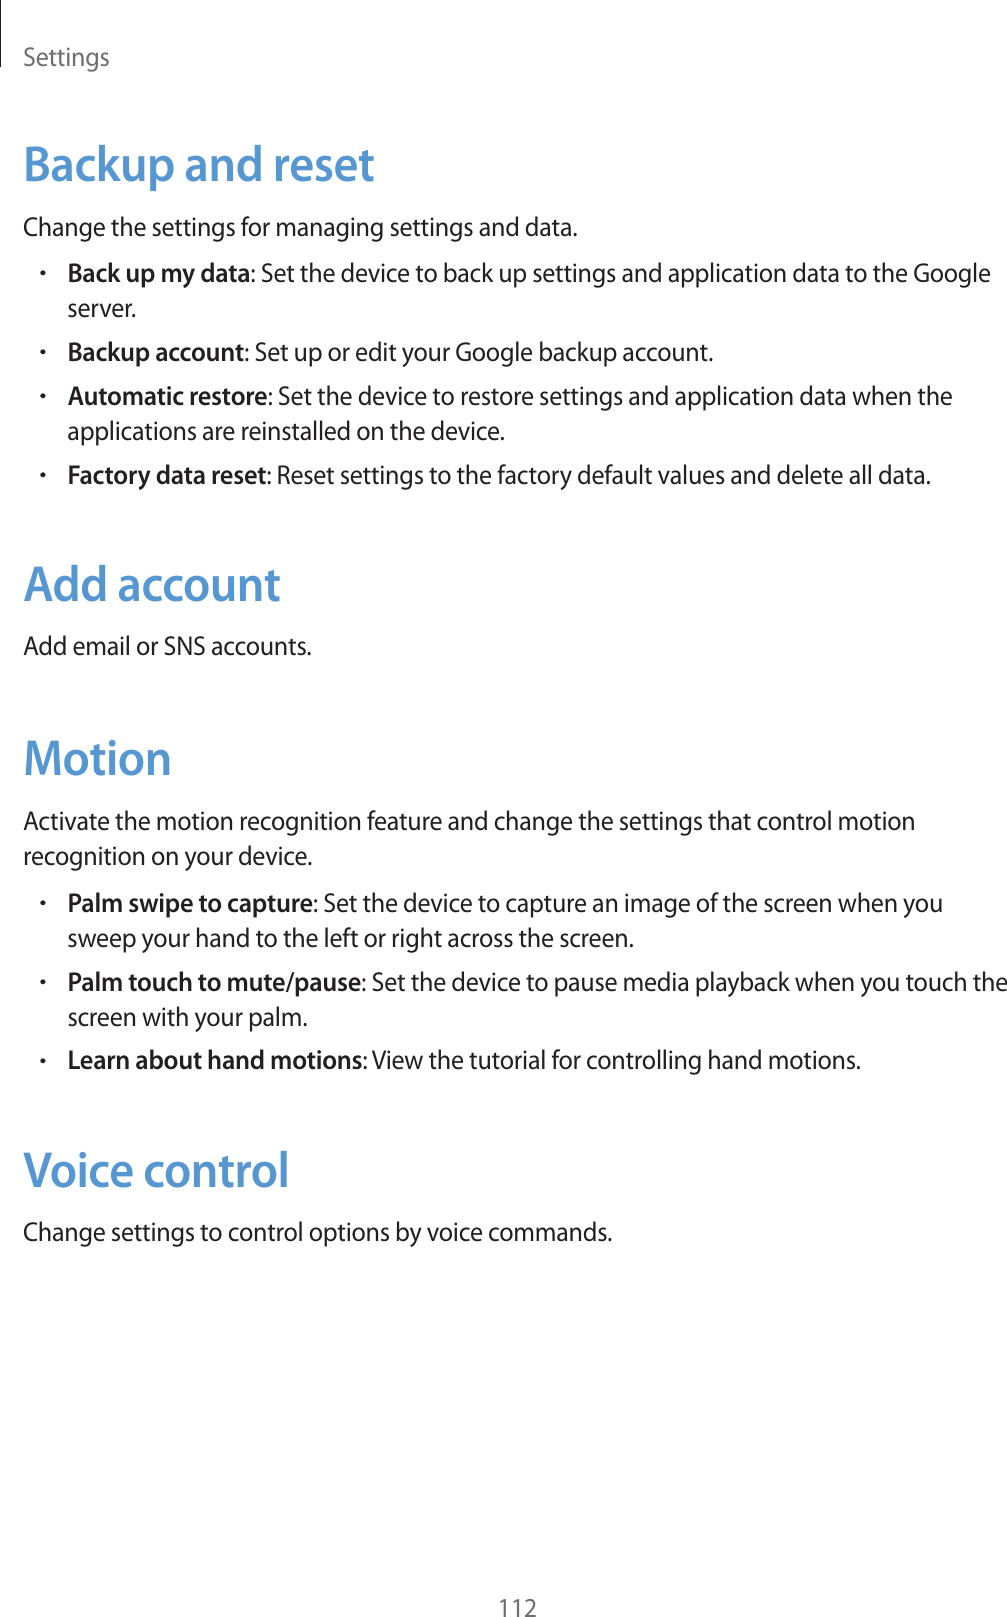 Settings112Backup and resetChange the settings for managing settings and data.rBack up my data: Set the device to back up settings and application data to the Google server.rBackup account: Set up or edit your Google backup account.rAutomatic restore: Set the device to restore settings and application data when the applications are reinstalled on the device.rFactory data reset: Reset settings to the factory default values and delete all data.Add accountAdd email or SNS accounts.MotionActivate the motion recognition feature and change the settings that control motion recognition on your device.rPalm swipe to capture: Set the device to capture an image of the screen when you sweep your hand to the left or right across the screen.rPalm touch to mute/pause: Set the device to pause media playback when you touch the screen with your palm.rLearn about hand motions: View the tutorial for controlling hand motions.Voice controlChange settings to control options by voice commands.